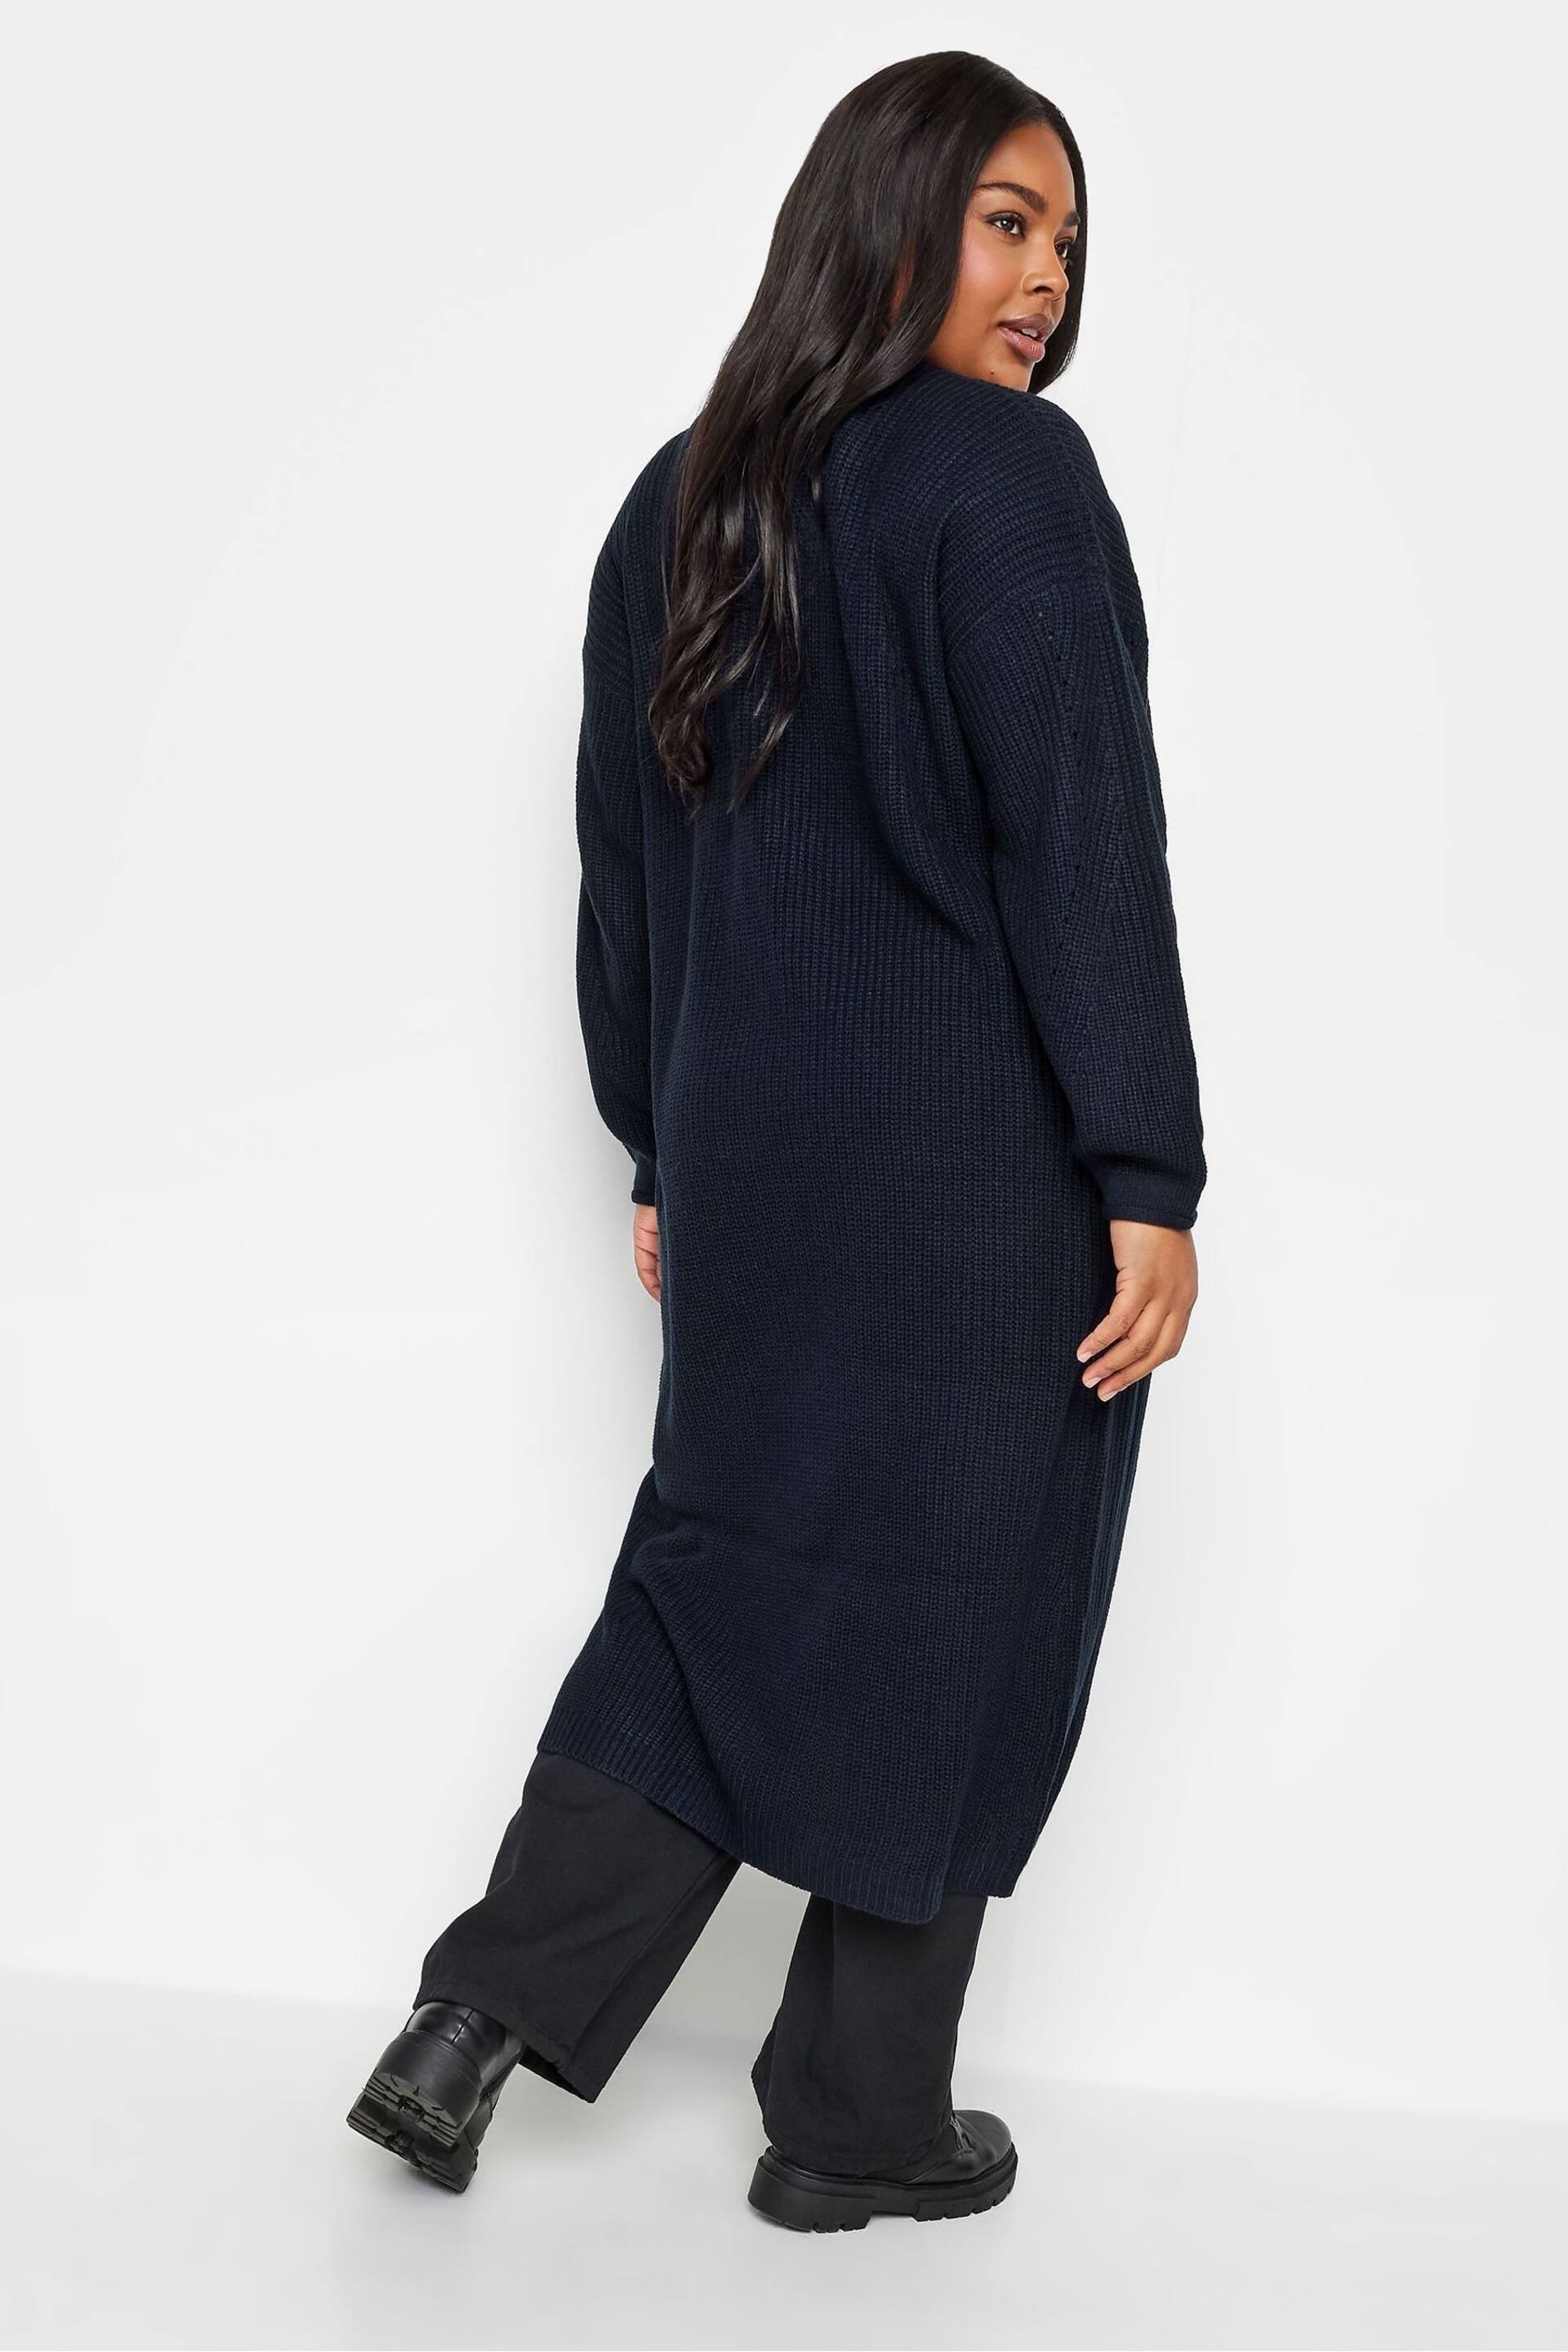 Yours Curve Blue Maxi Cardigan - Image 2 of 4